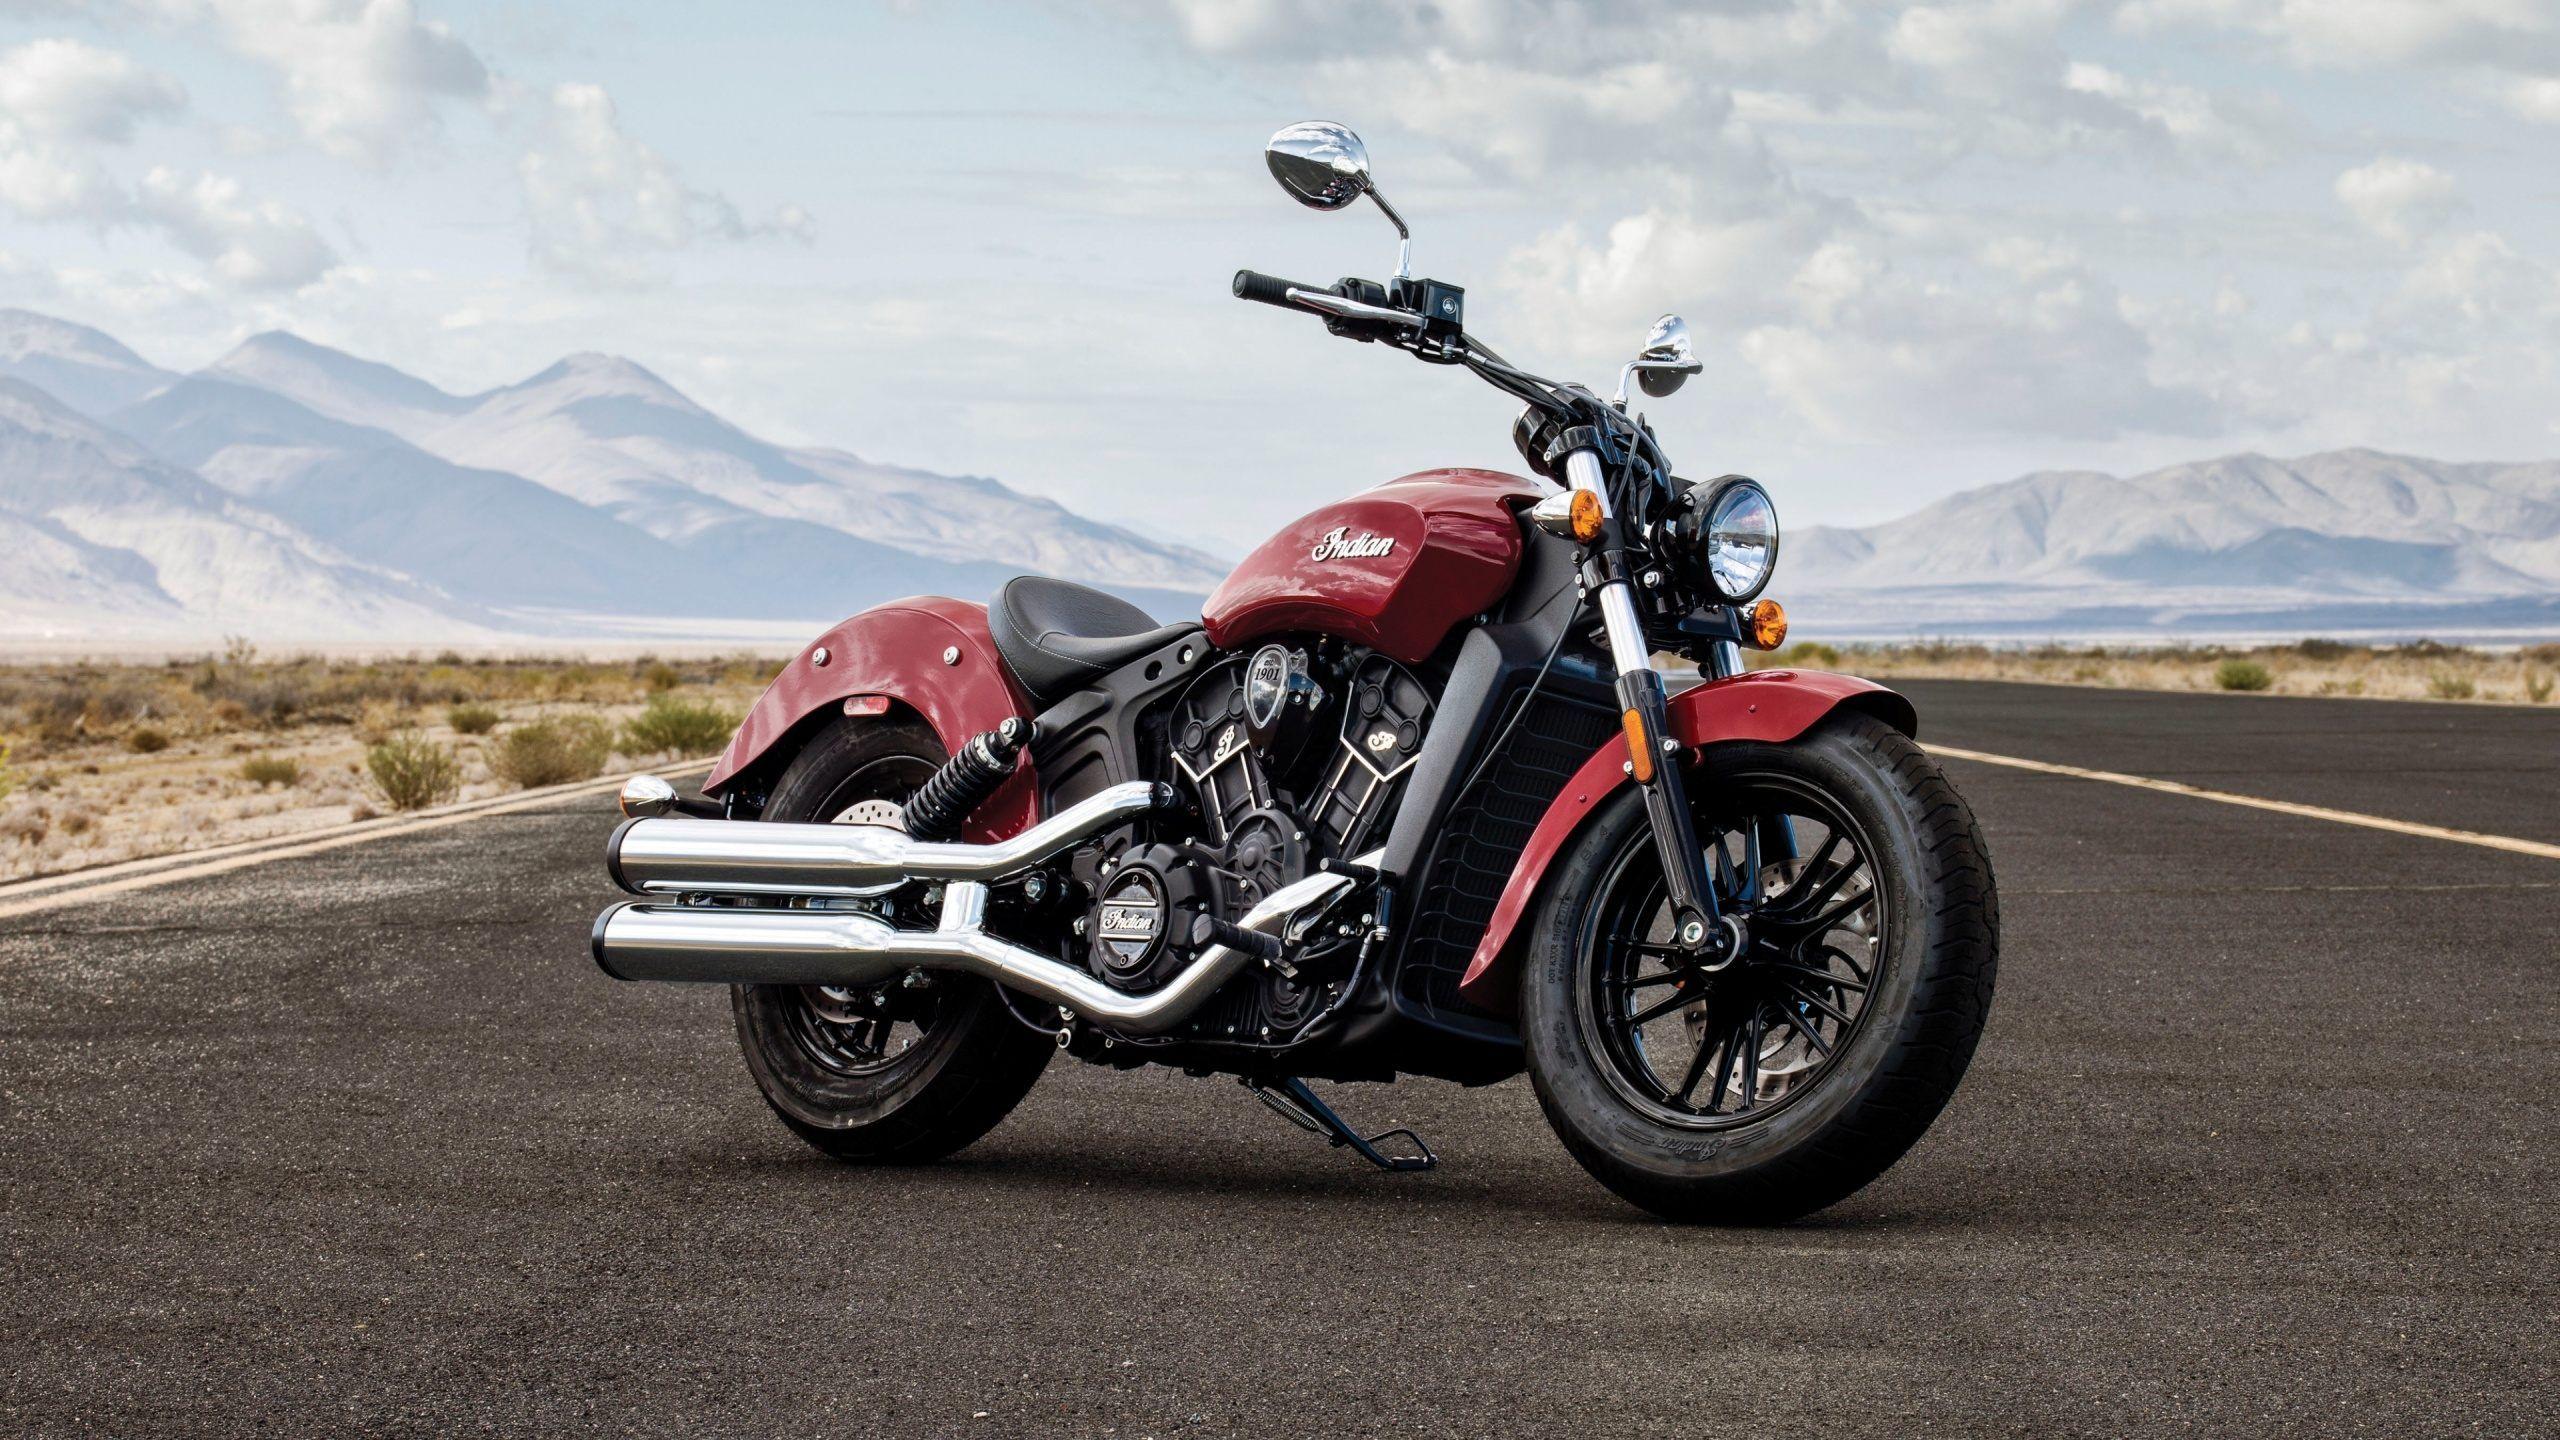 indian scout sixty bike wallpaper. Indian scout, Scout